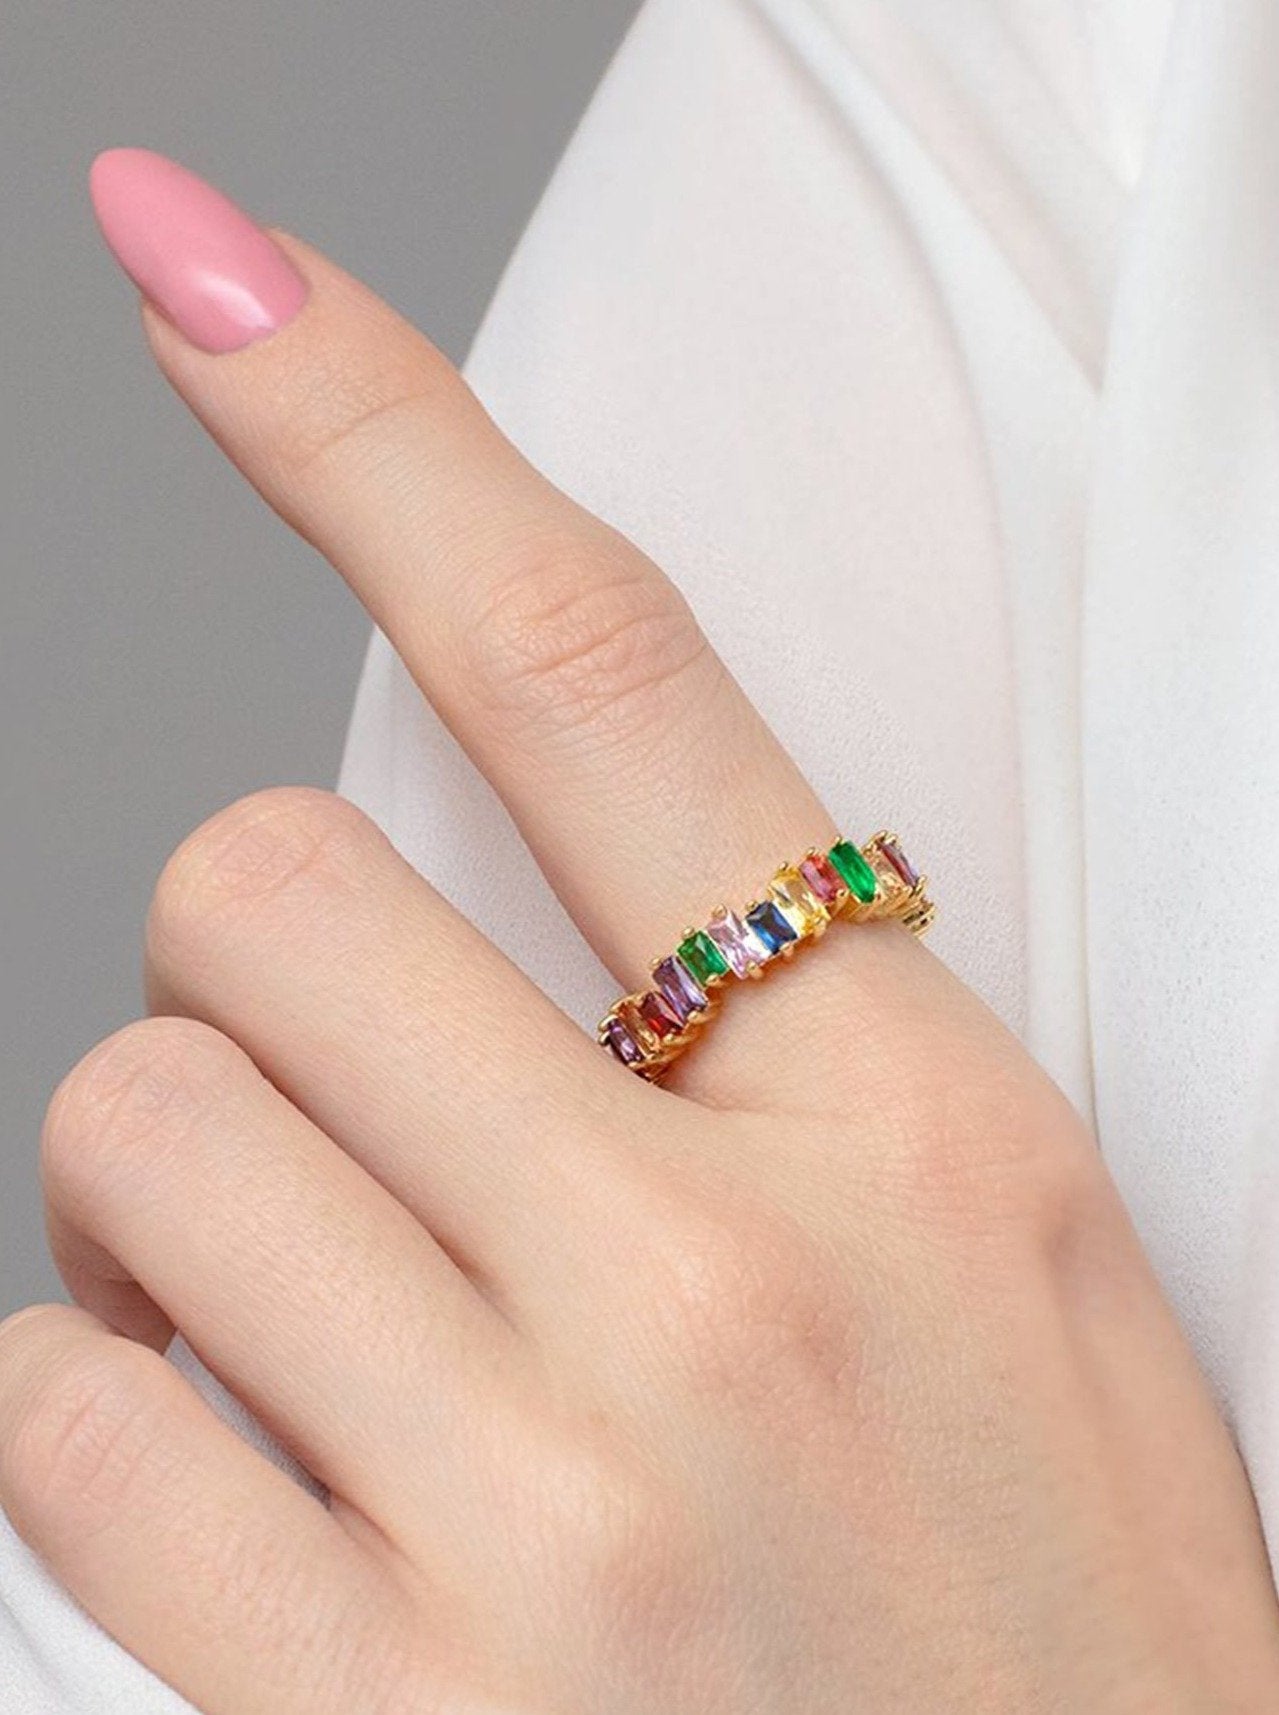 Model with pink nails wearing a colourful rainbow ring.